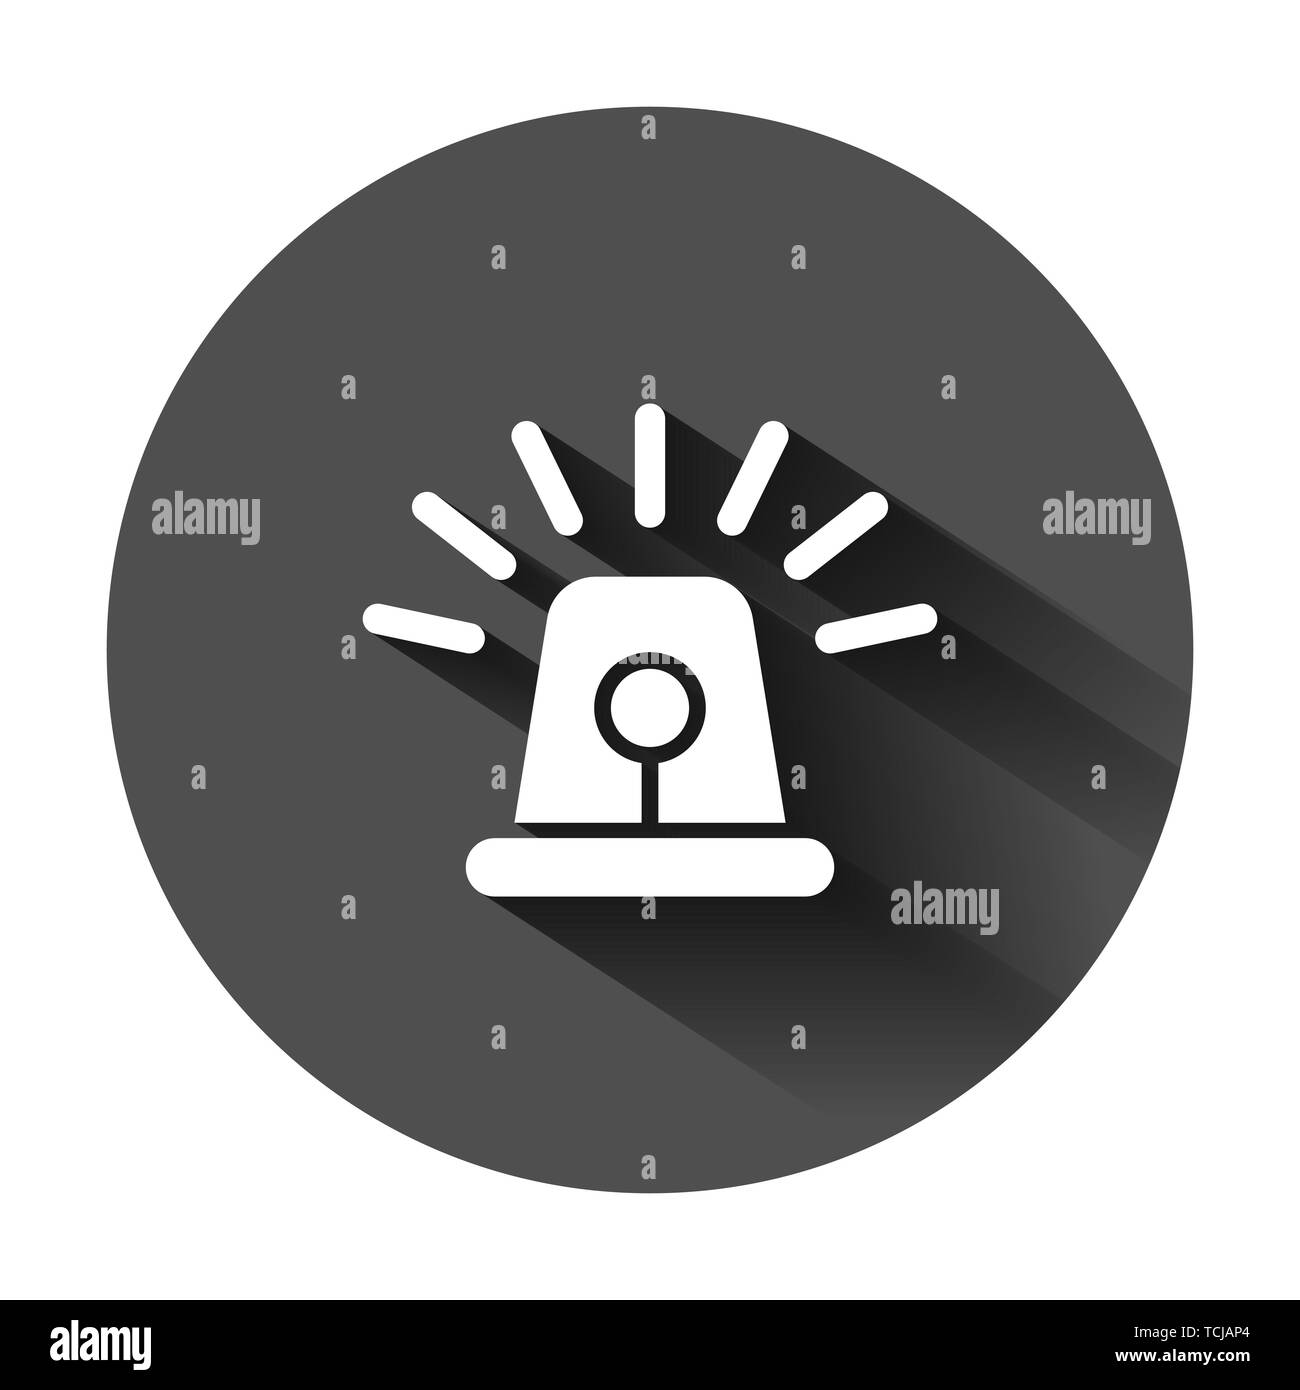 Emergency siren icon in flat style. Police alarm vector illustration on black round background with long shadow. Medical alert business concept. Stock Vector